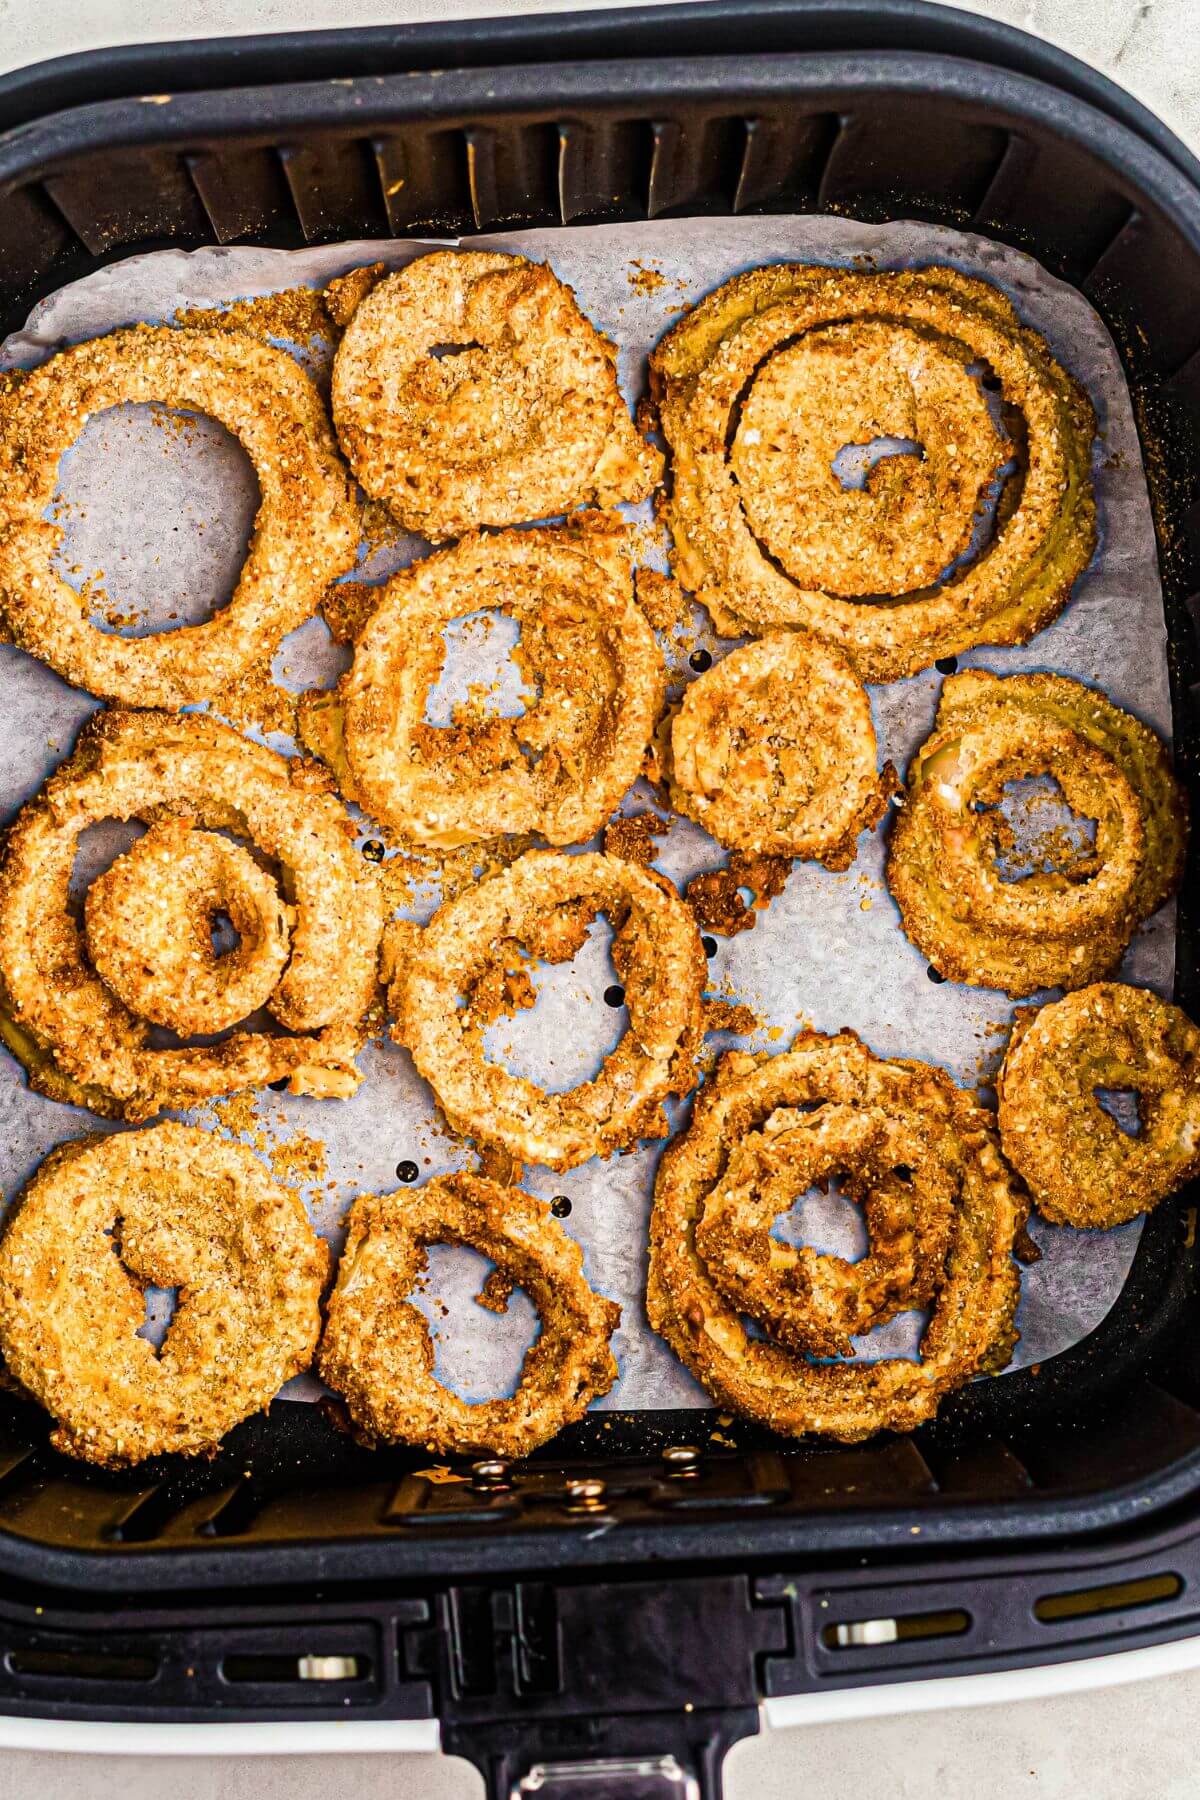 Crispy golden onion rings in the air fryer basket after being cooked. 